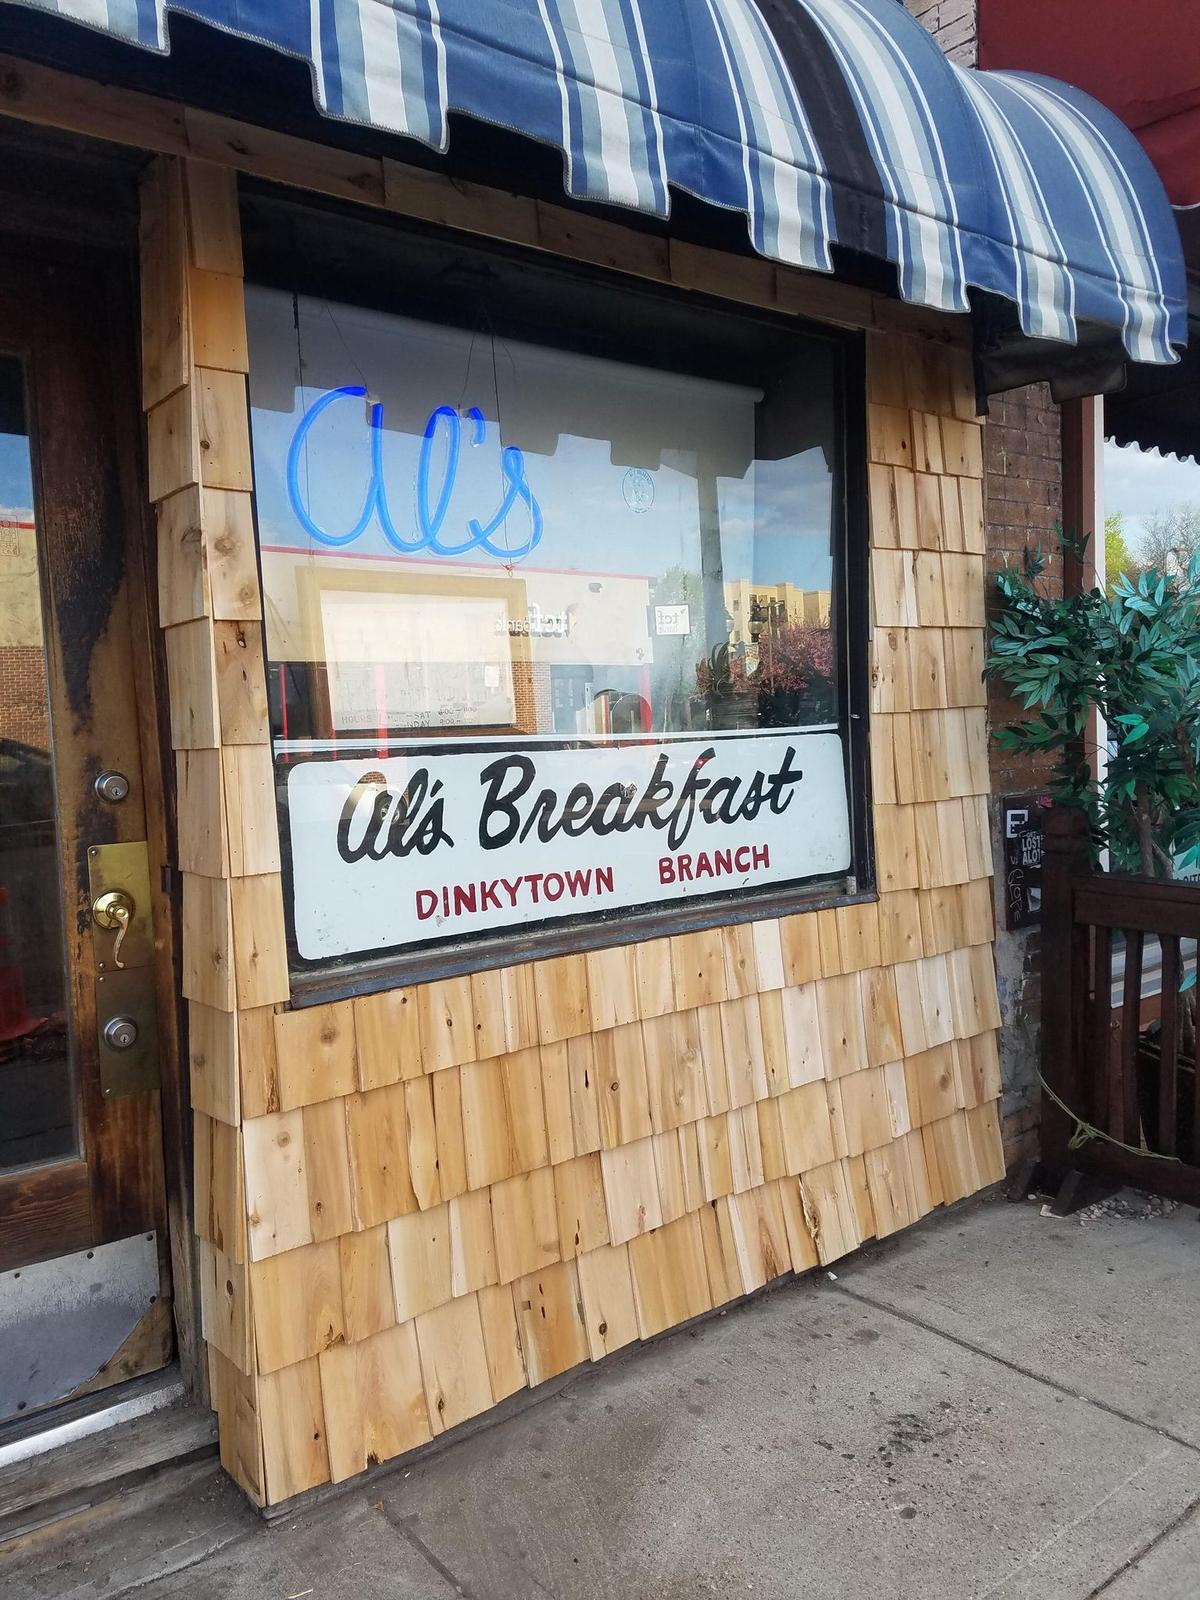 The facade of Al’s Breakfast, which is said to be the narrowest restaurant in Minneapolis, Minn. (Courtesy of Al's Breakfast)